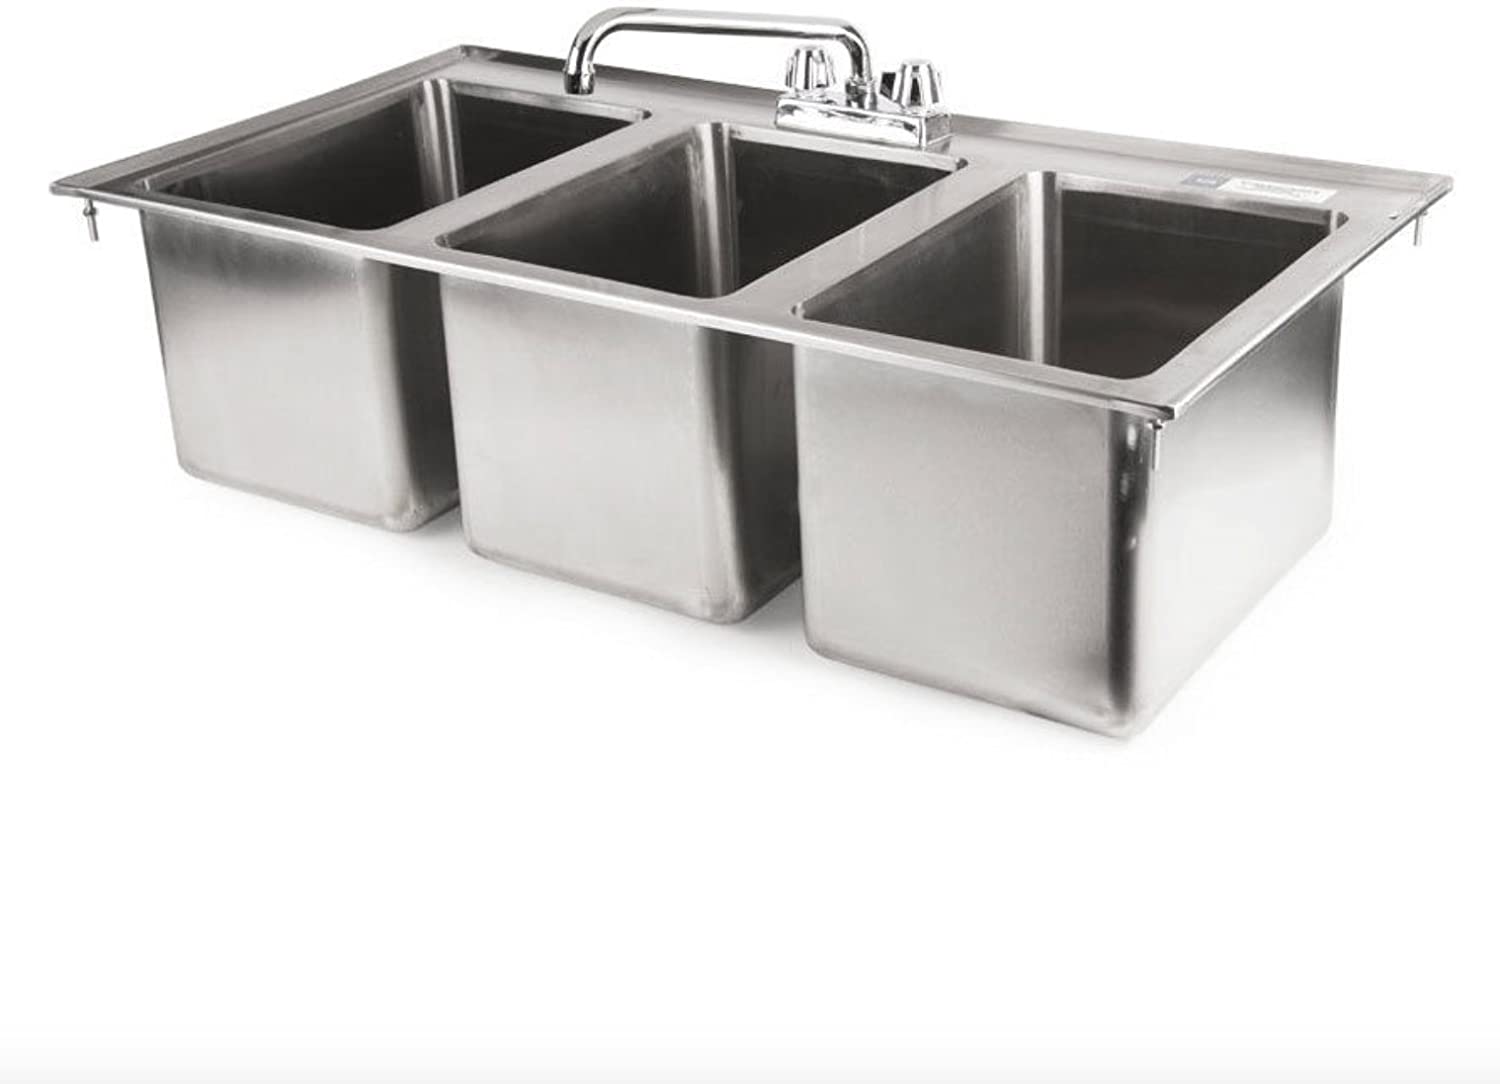 "3-Compartment 37""L x 19""W Stainless Steel Kitchen Drop-In Sink 10"" x 14"" x 10"" stainless steel 3 compartment drop-in sink!" - image 3 of 4